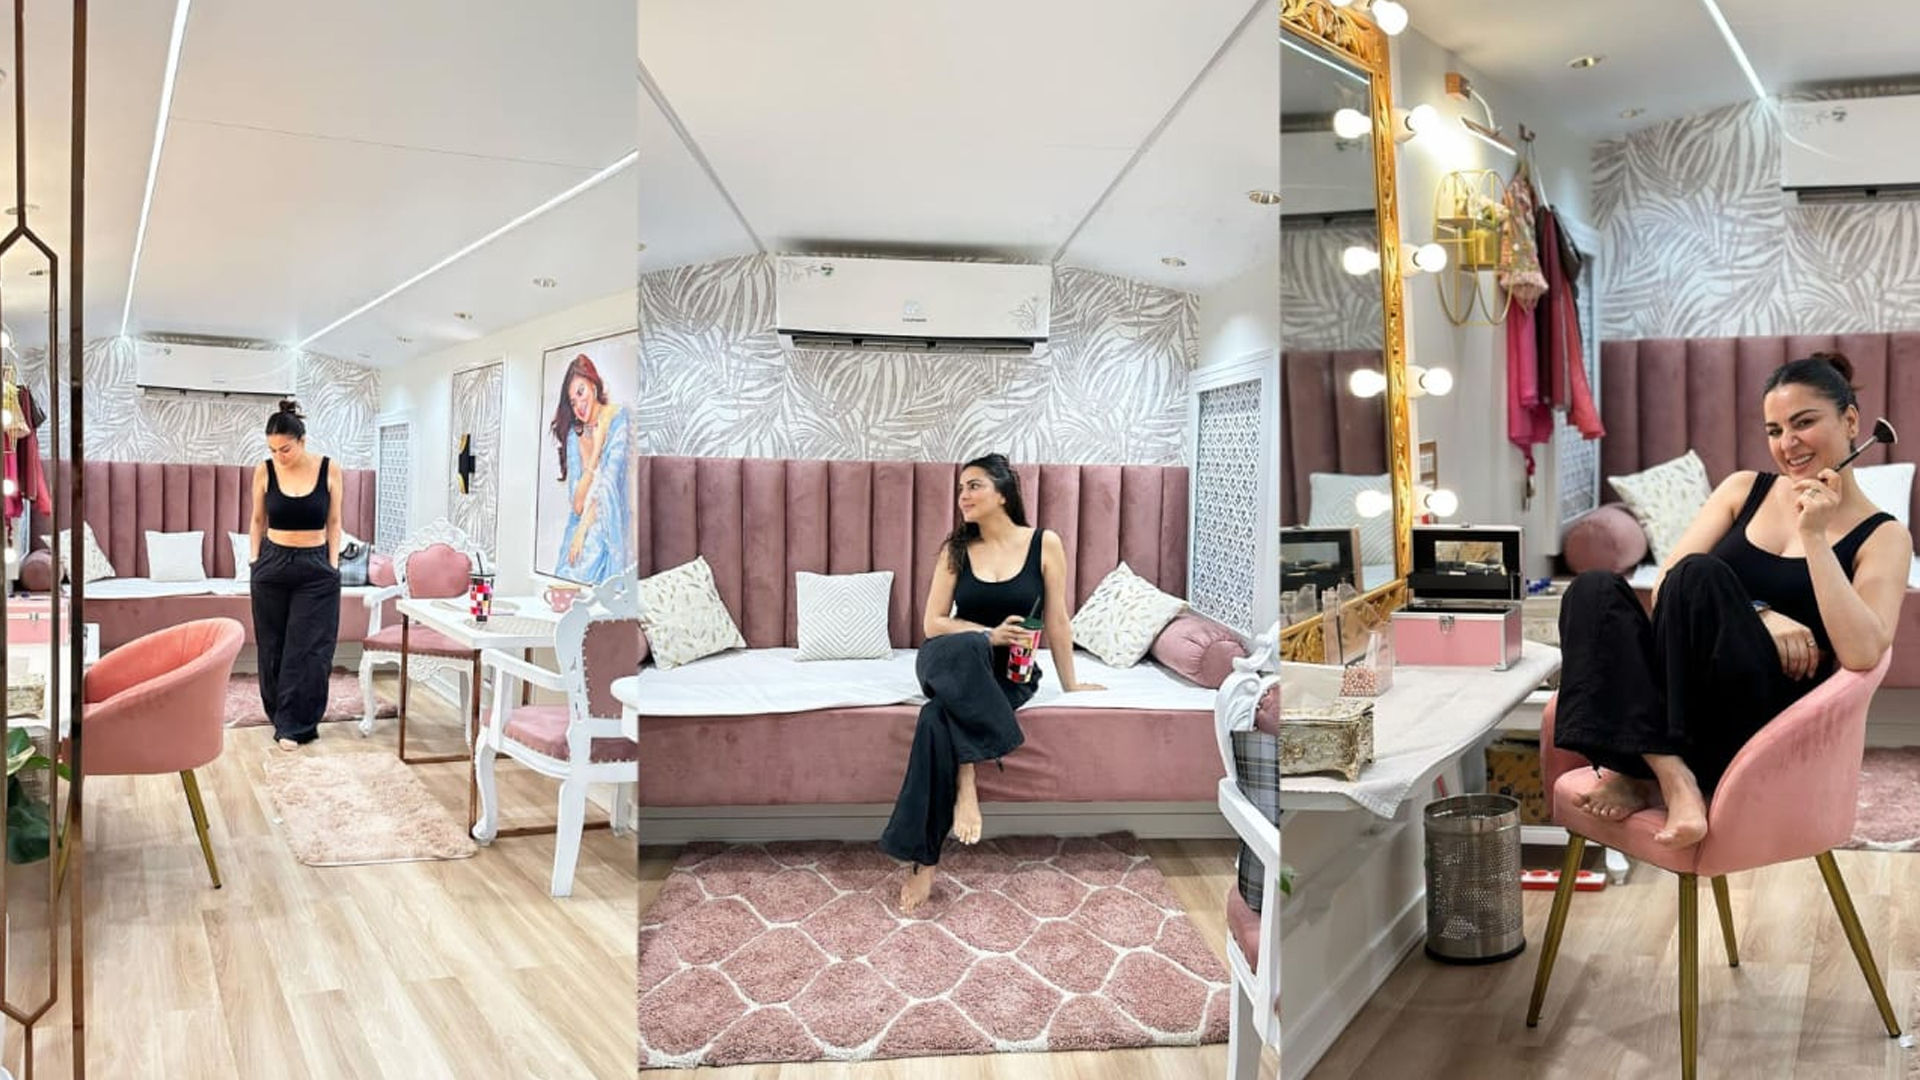 A cozy abode on wheels: Kundali Bhagya actress Shraddha Arya aesthetically transforms her vanity van with a personal touch